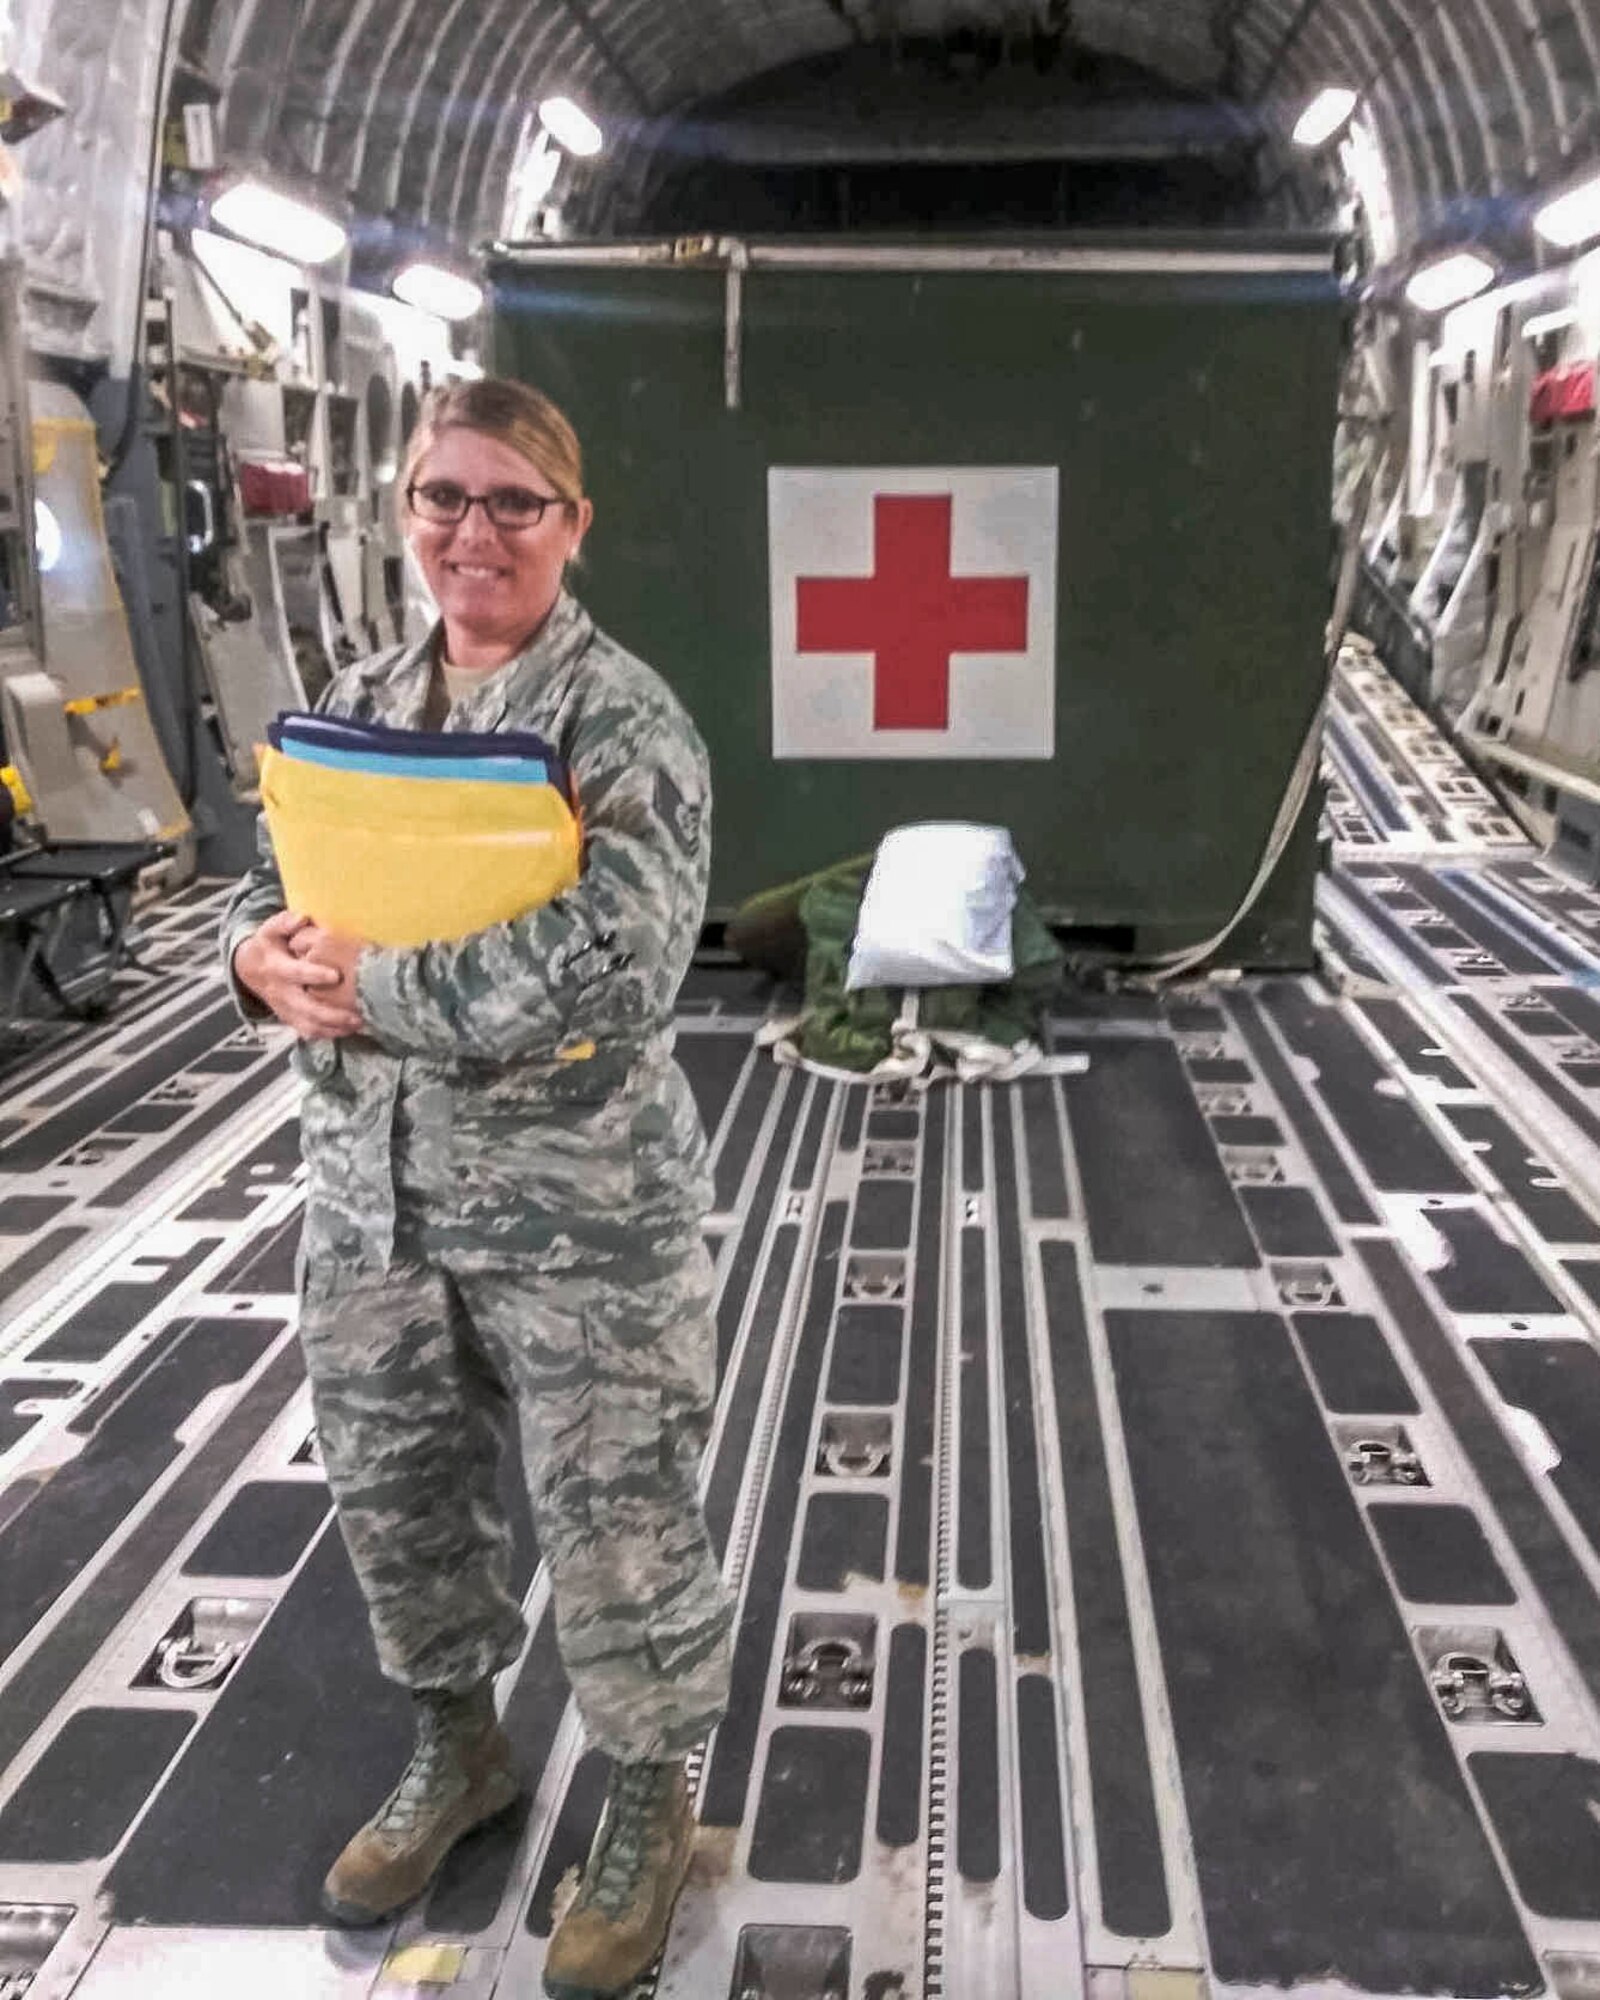 Tech. Sgt. Bridget Goodknight, 913th Aerospace Medicine Squadron Health Services Administration, participates in aeromedical evacuation training on June 13, 2019 at Tripler Army Medical Center, Honolulu. Members of the 913th AMDS participated in a variety of preparedness training including first response and transporting patients to aircraft, preparing for current and future real world missions and requirements. (Courtesy photo)